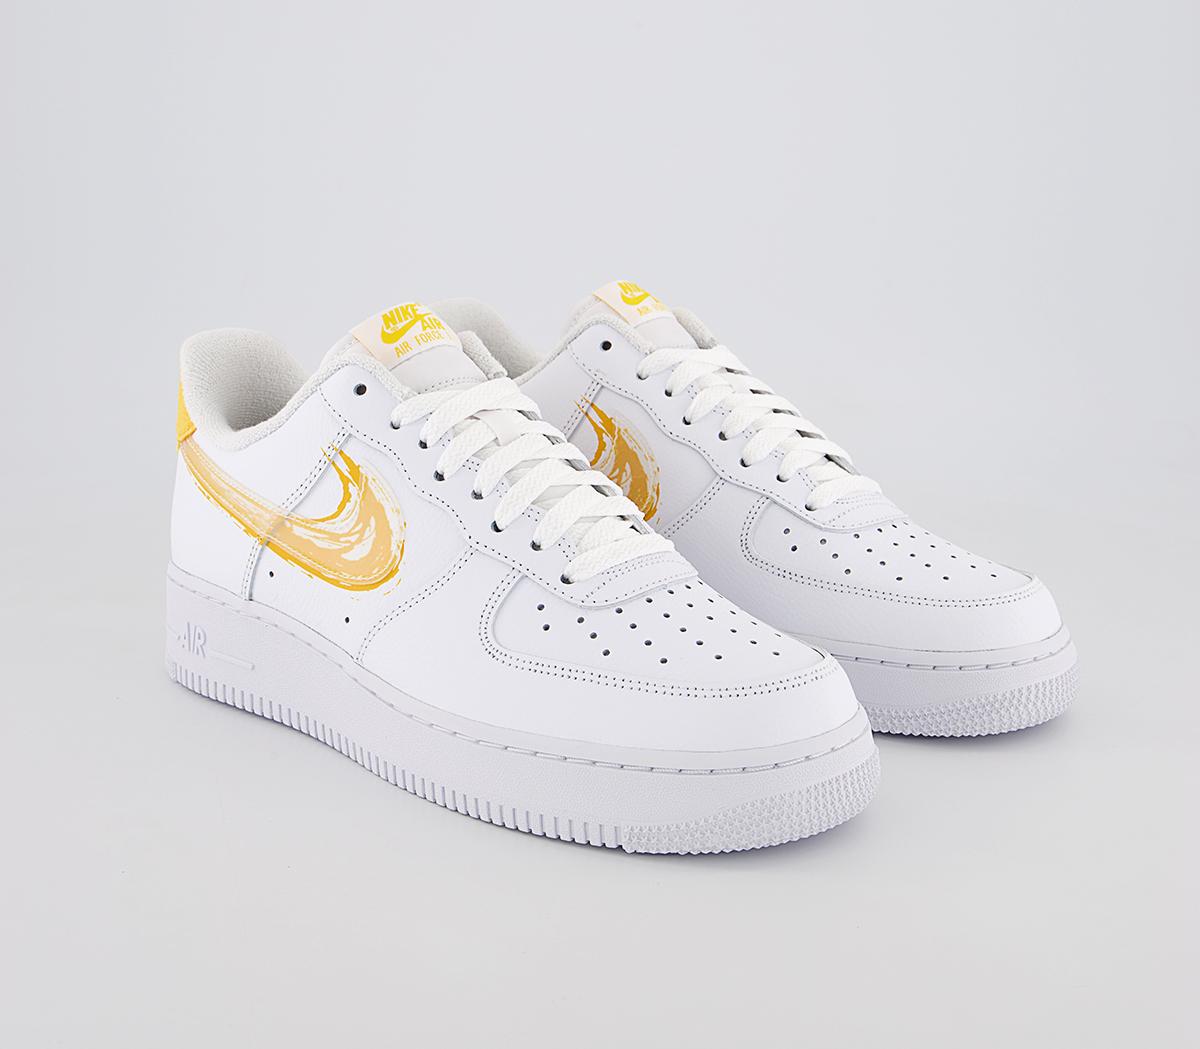 Nike Air Force 1 07 Trainers White Solar Flare, 3.5